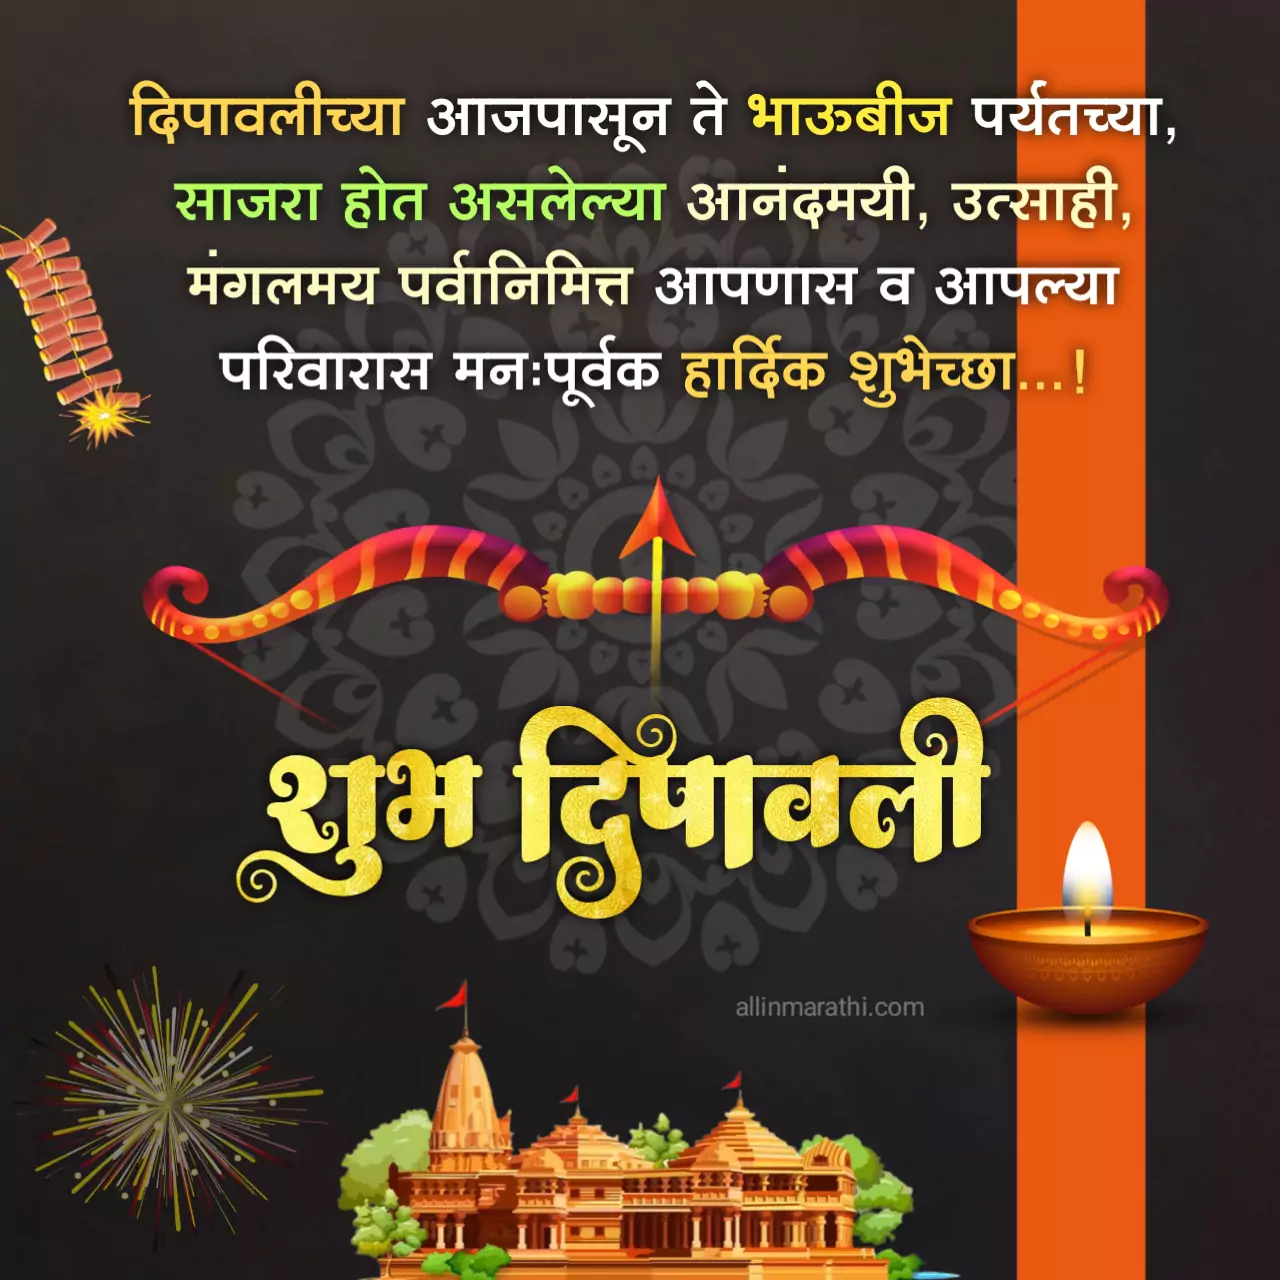 Diwali wishes in marathi with images